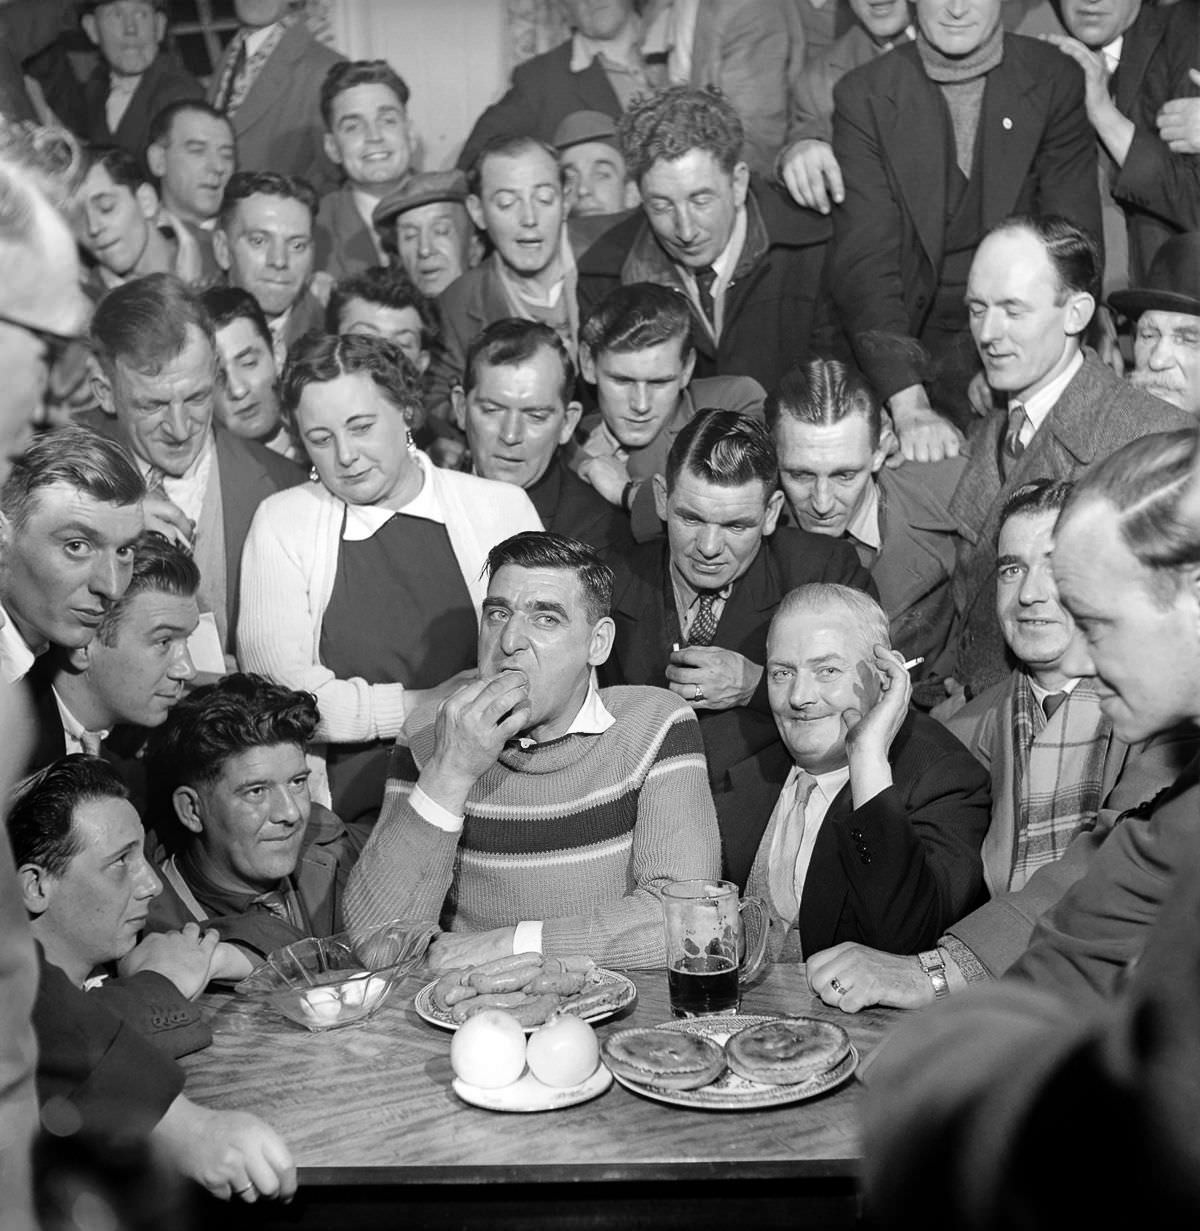 Spectators look on as Joe Steele takes part in a food-eating competition, 1958.